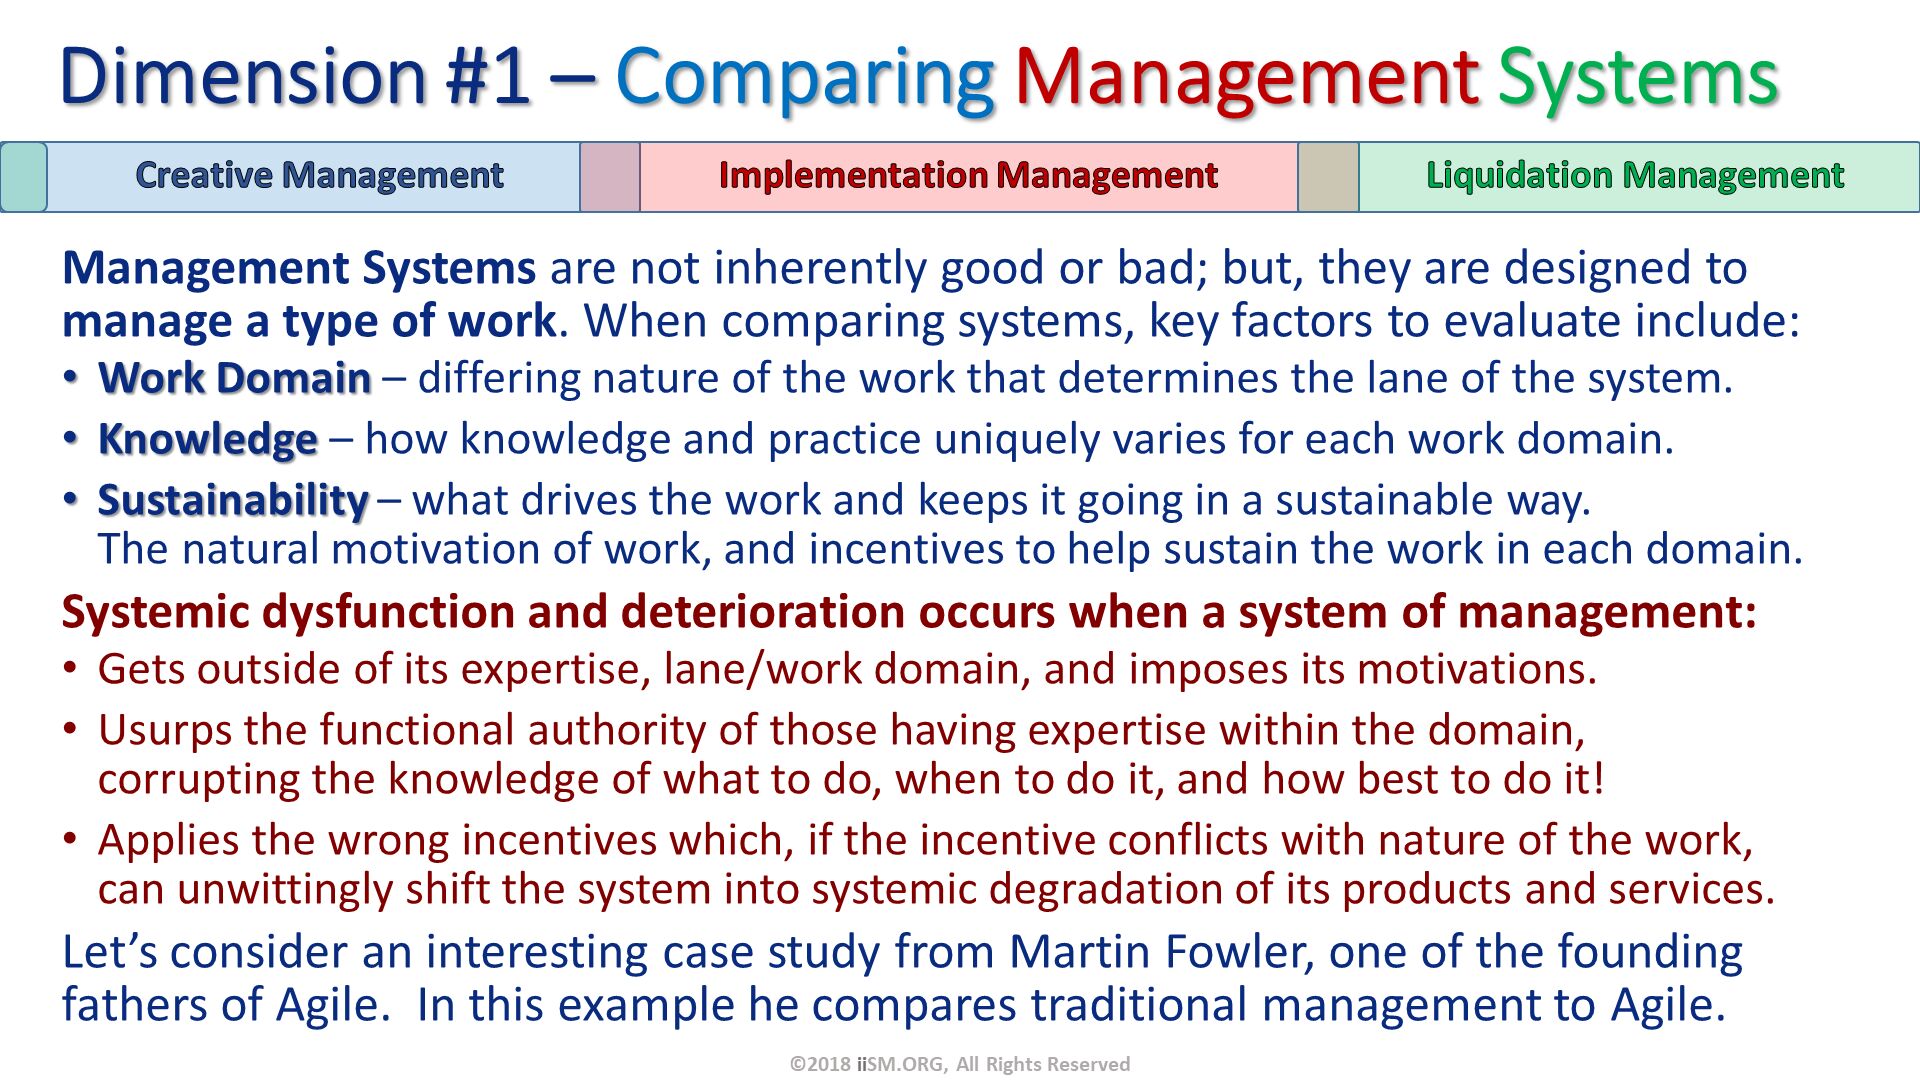 Management Systems are not inherently good or bad; but, they are designed to manage a type of work. When comparing systems, key factors to evaluate include:
Work Domain – differing nature of the work that determines the lane of the system.
Knowledge – how knowledge and practice uniquely varies for each work domain.
Sustainability – what drives the work and keeps it going in a sustainable way.  The natural motivation of work, and incentives to help sustain the work in each domain. 
Systemic dysfunction and deterioration occurs when a system of management:
Gets outside of its expertise, lane/work domain, and imposes its motivations.
Usurps the functional authority of those having expertise within the domain, corrupting the knowledge of what to do, when to do it, and how best to do it!
Applies the wrong incentives which, if the incentive conflicts with nature of the work, can unwittingly shift the system into systemic degradation of its products and services.
Let’s consider an interesting case study from Martin Fowler, one of the founding fathers of Agile.  In this example he compares traditional management to Agile. Dimension #1 – Comparing Management Systems. ©2018 iiSM.ORG, All Rights Reserved. 